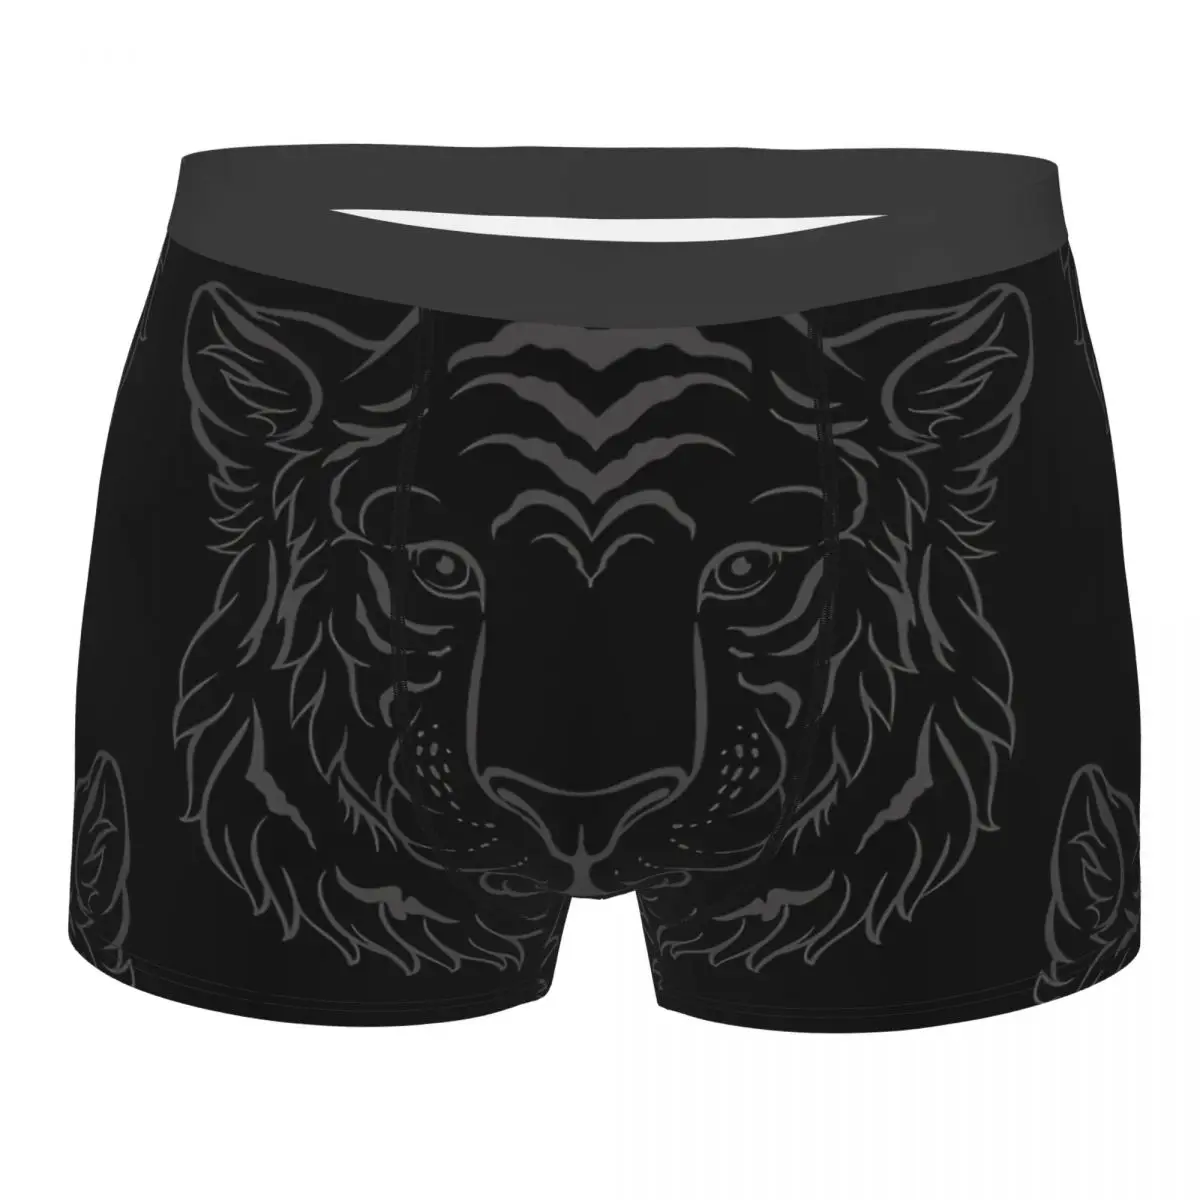 

Dark Men Boxer Briefs Tiger Animal Lover Highly Breathable Underpants Top Quality Print Shorts Gift Idea